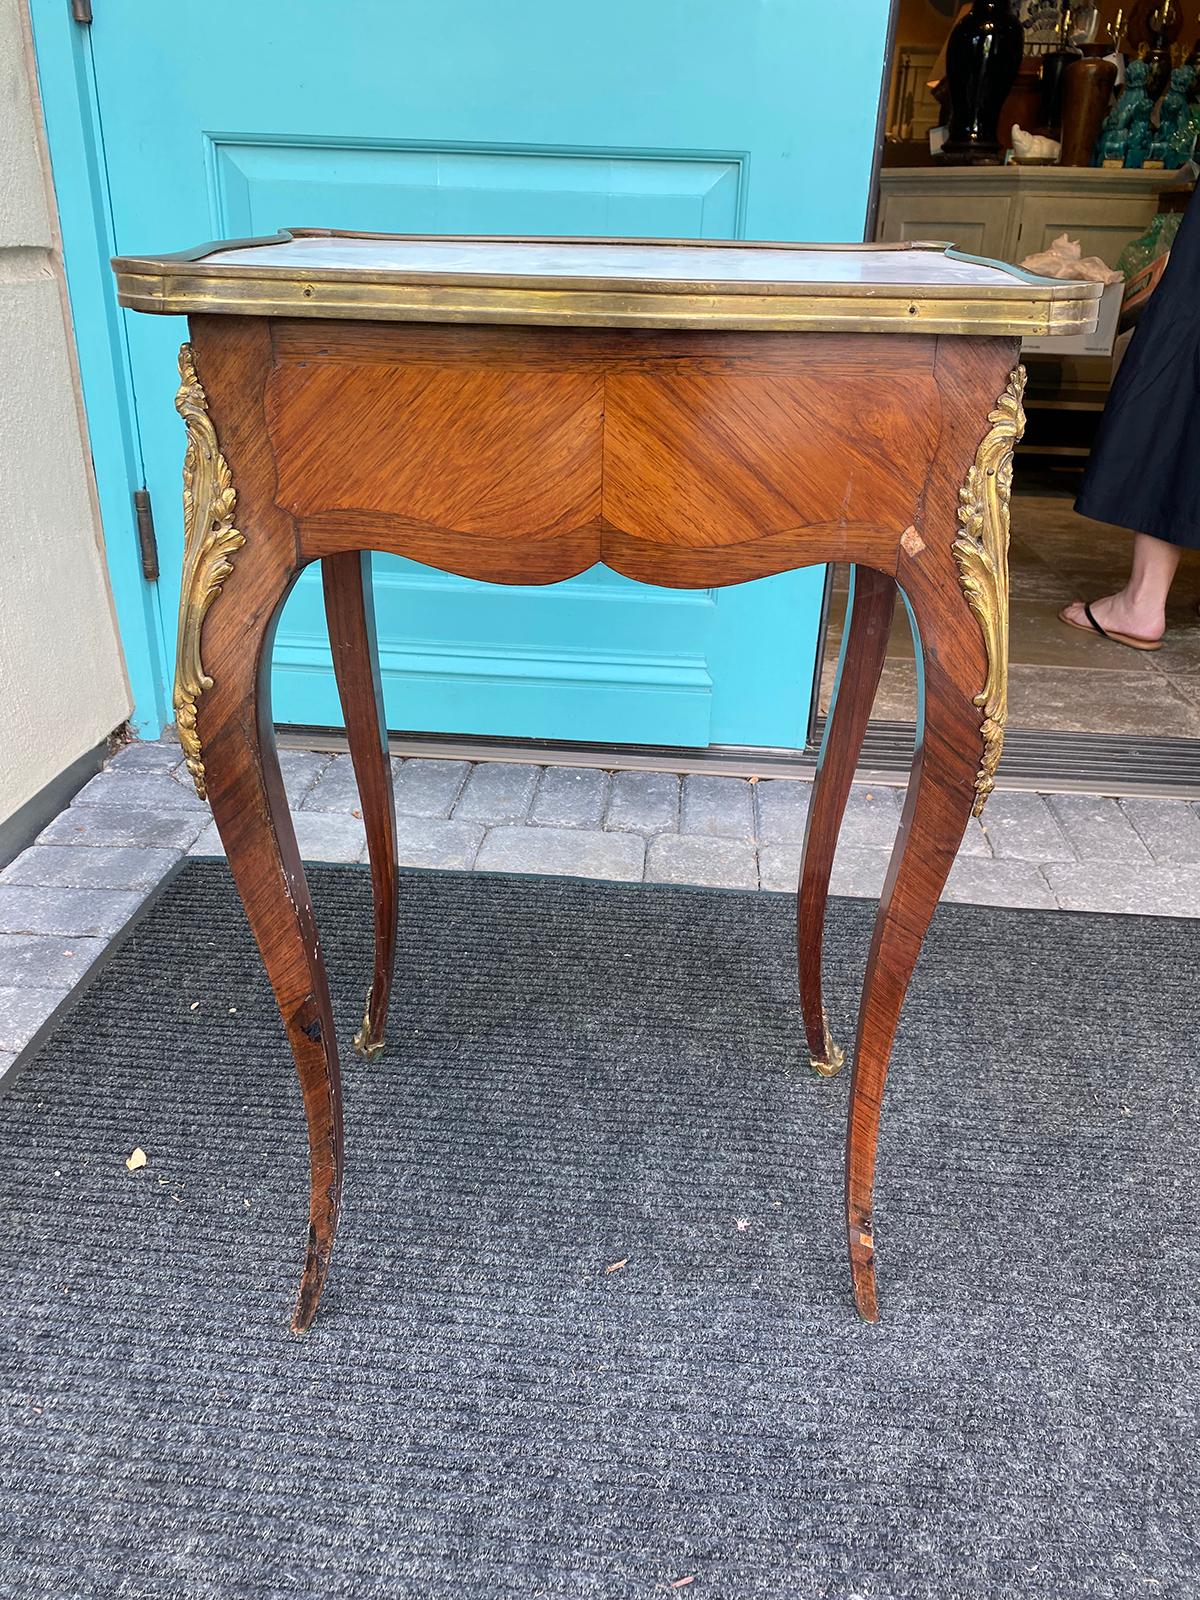 19th Century French Ormolu Mounted Marble Top Side Table, 1 Drawer For Sale 5